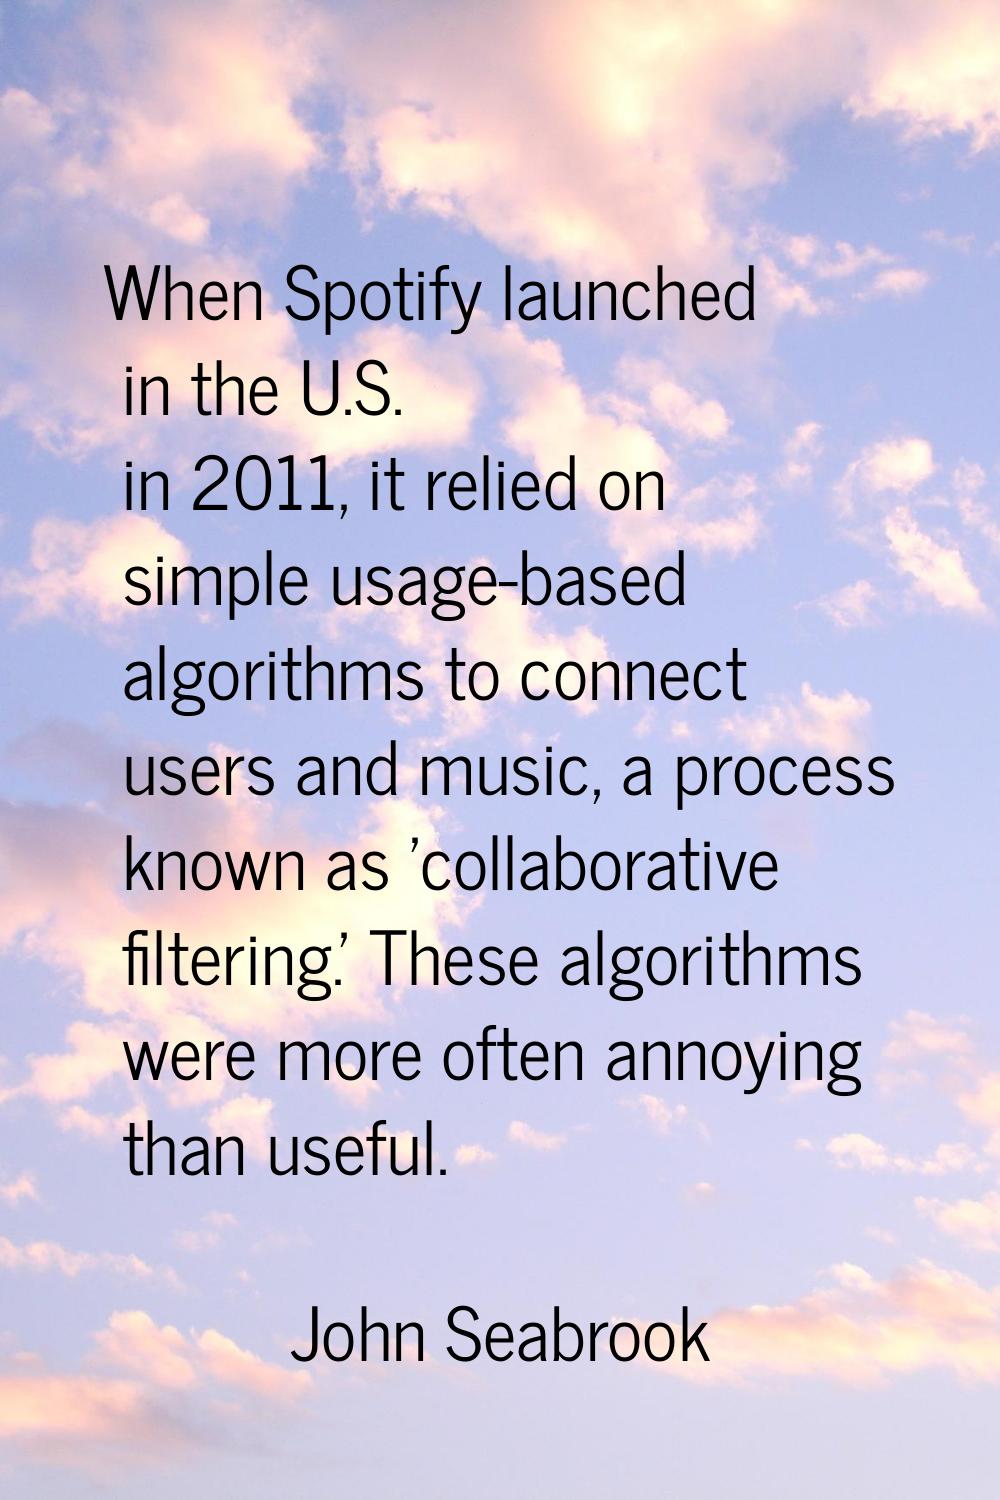 When Spotify launched in the U.S. in 2011, it relied on simple usage-based algorithms to connect us